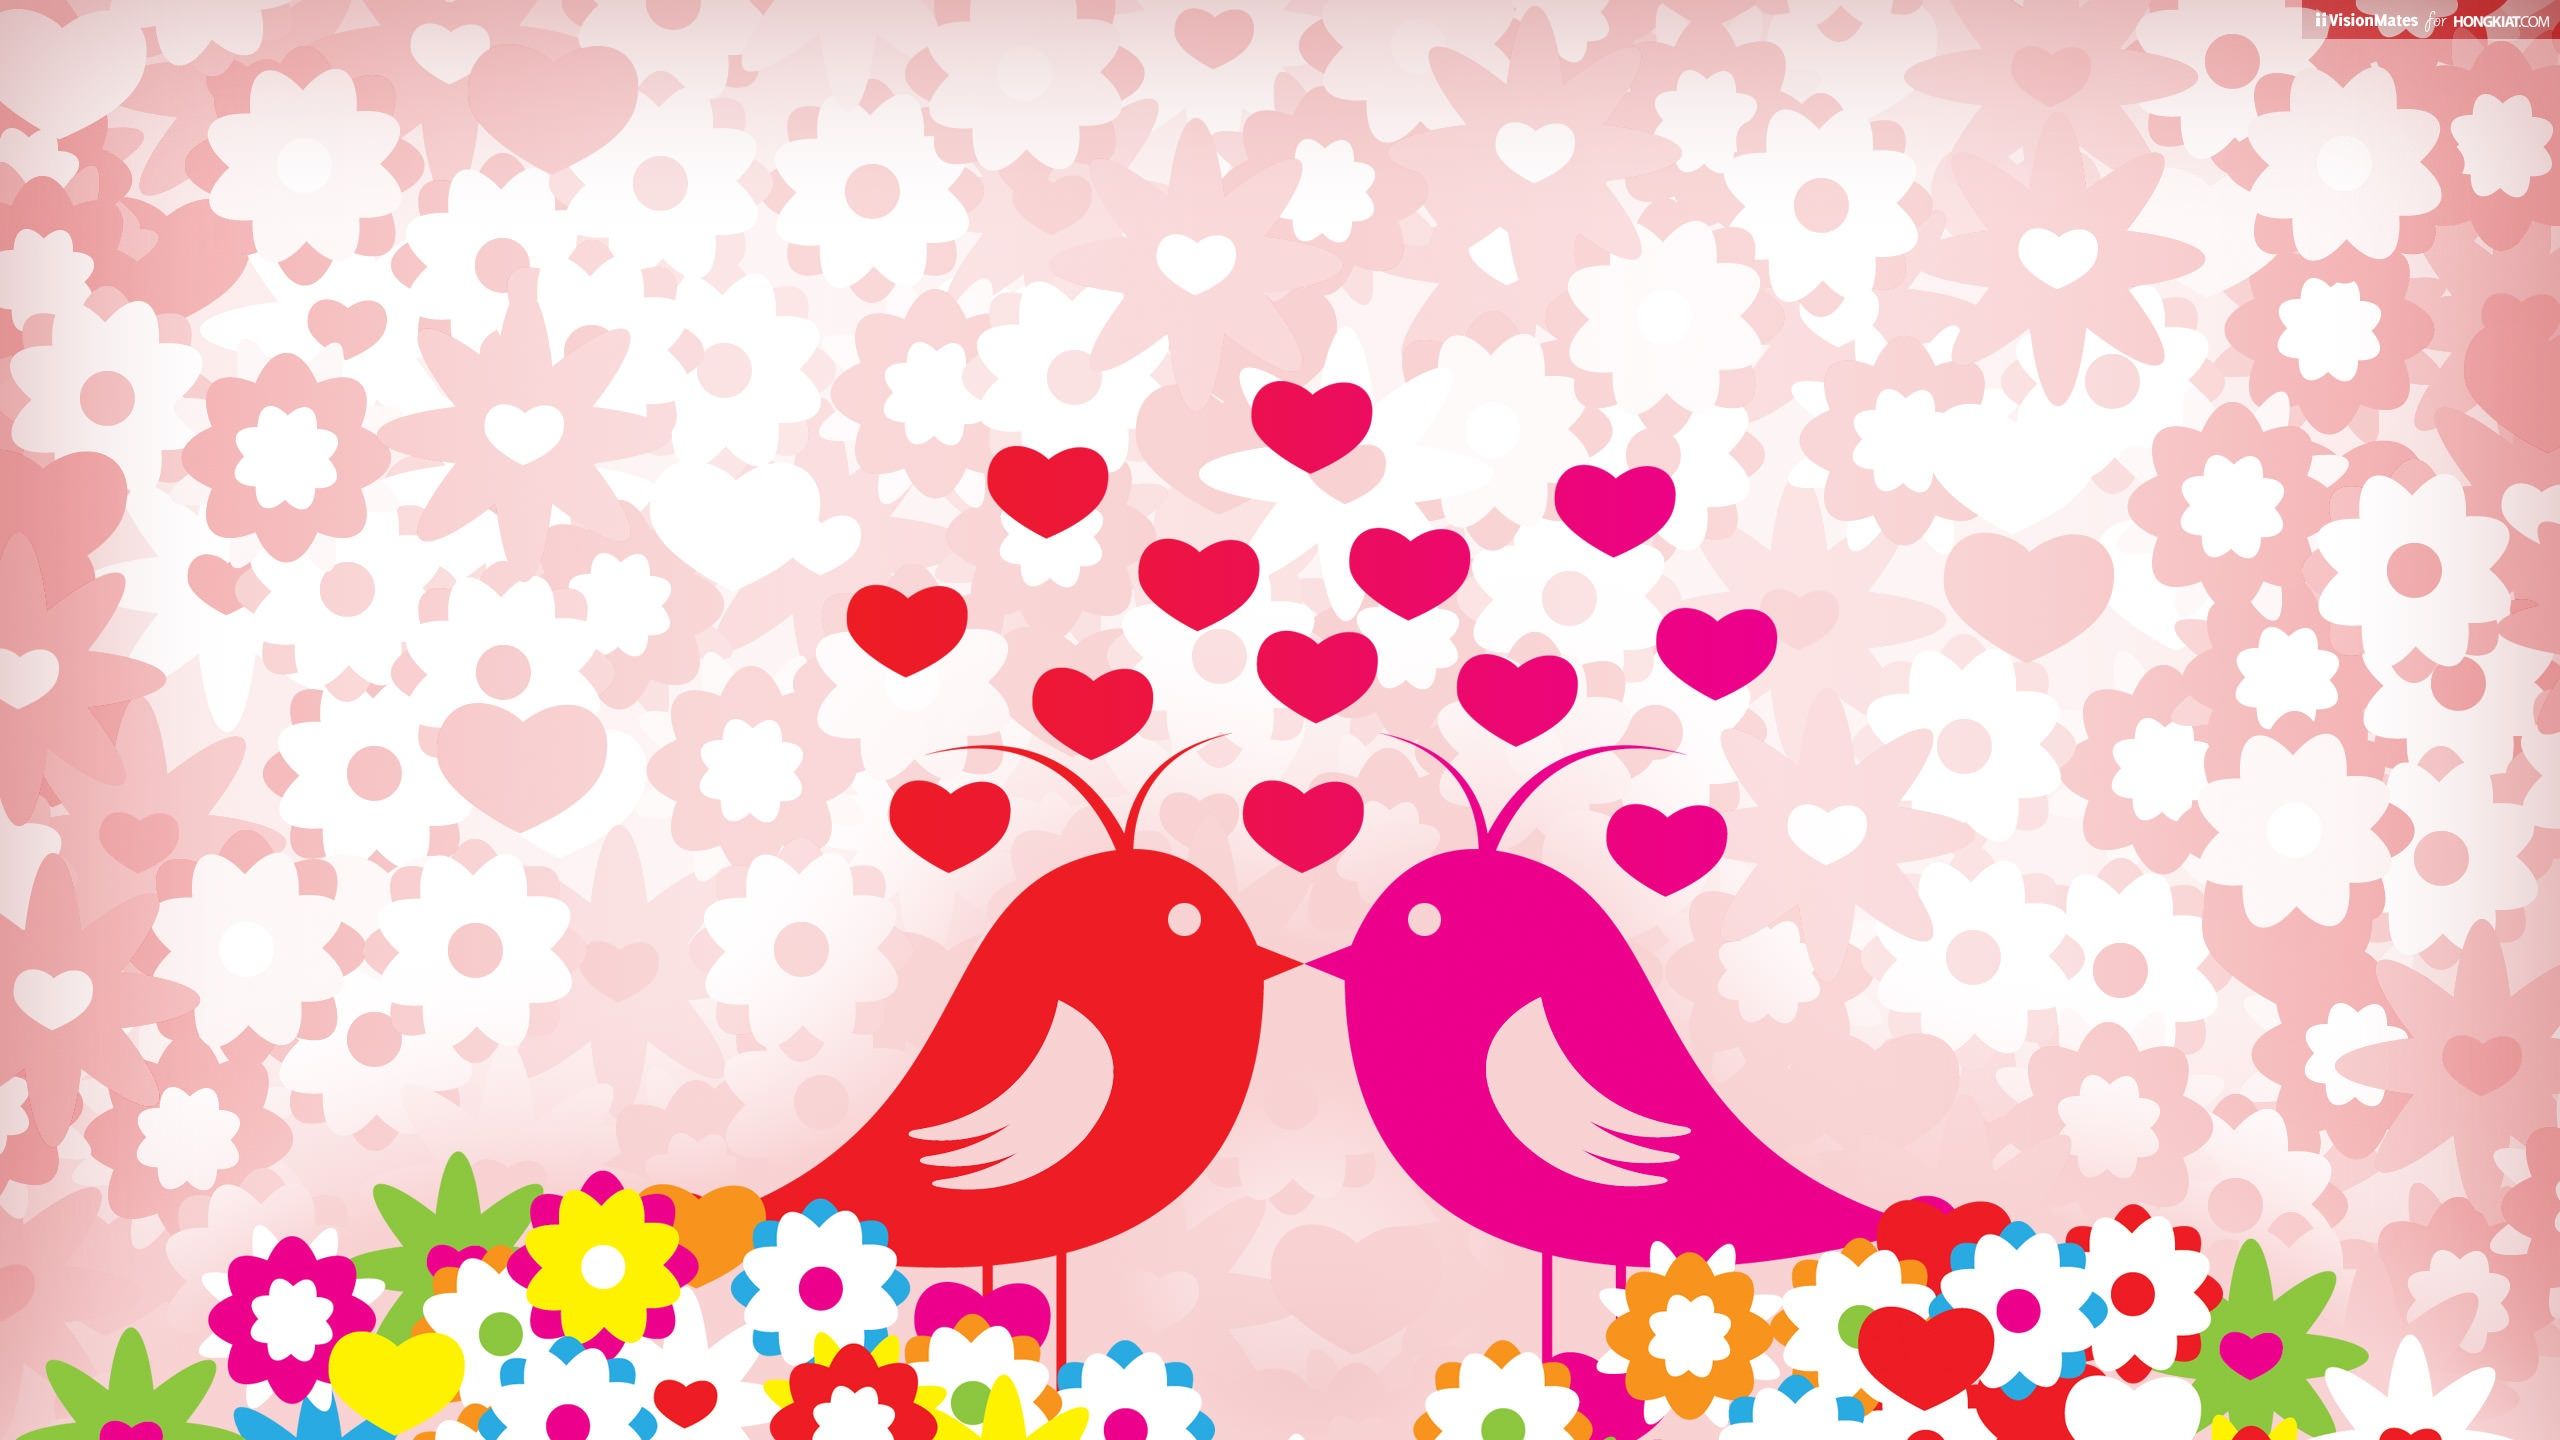 Love Wallpapers | Valentine's Day Wallpapers | Love Hearts - Page 2